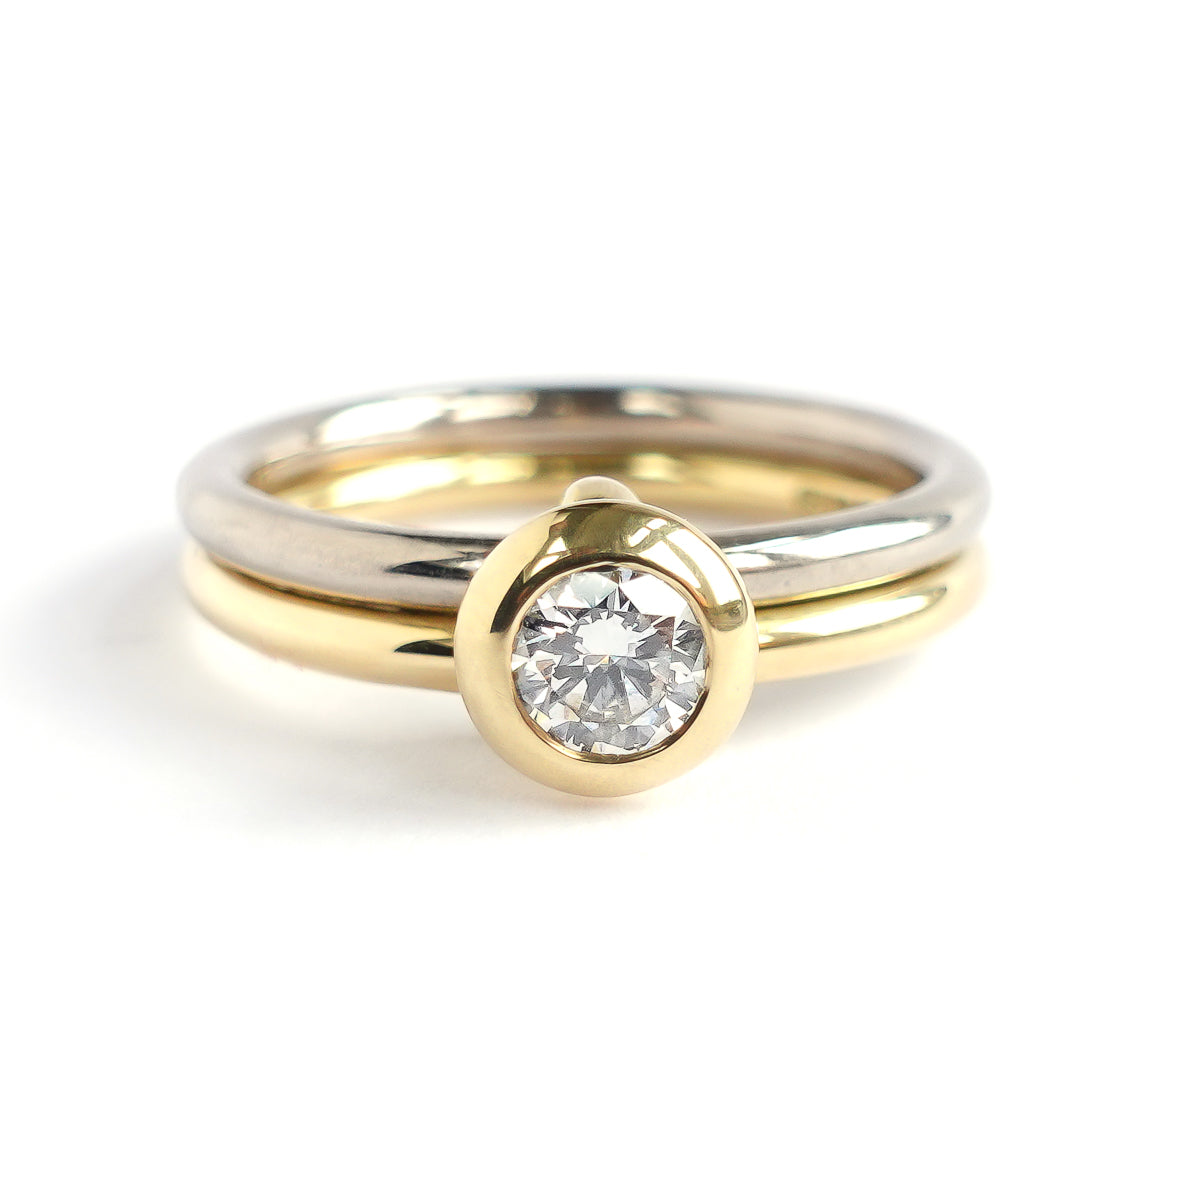 18ct white and yellow gold two band contemporary ring with certified diamond.